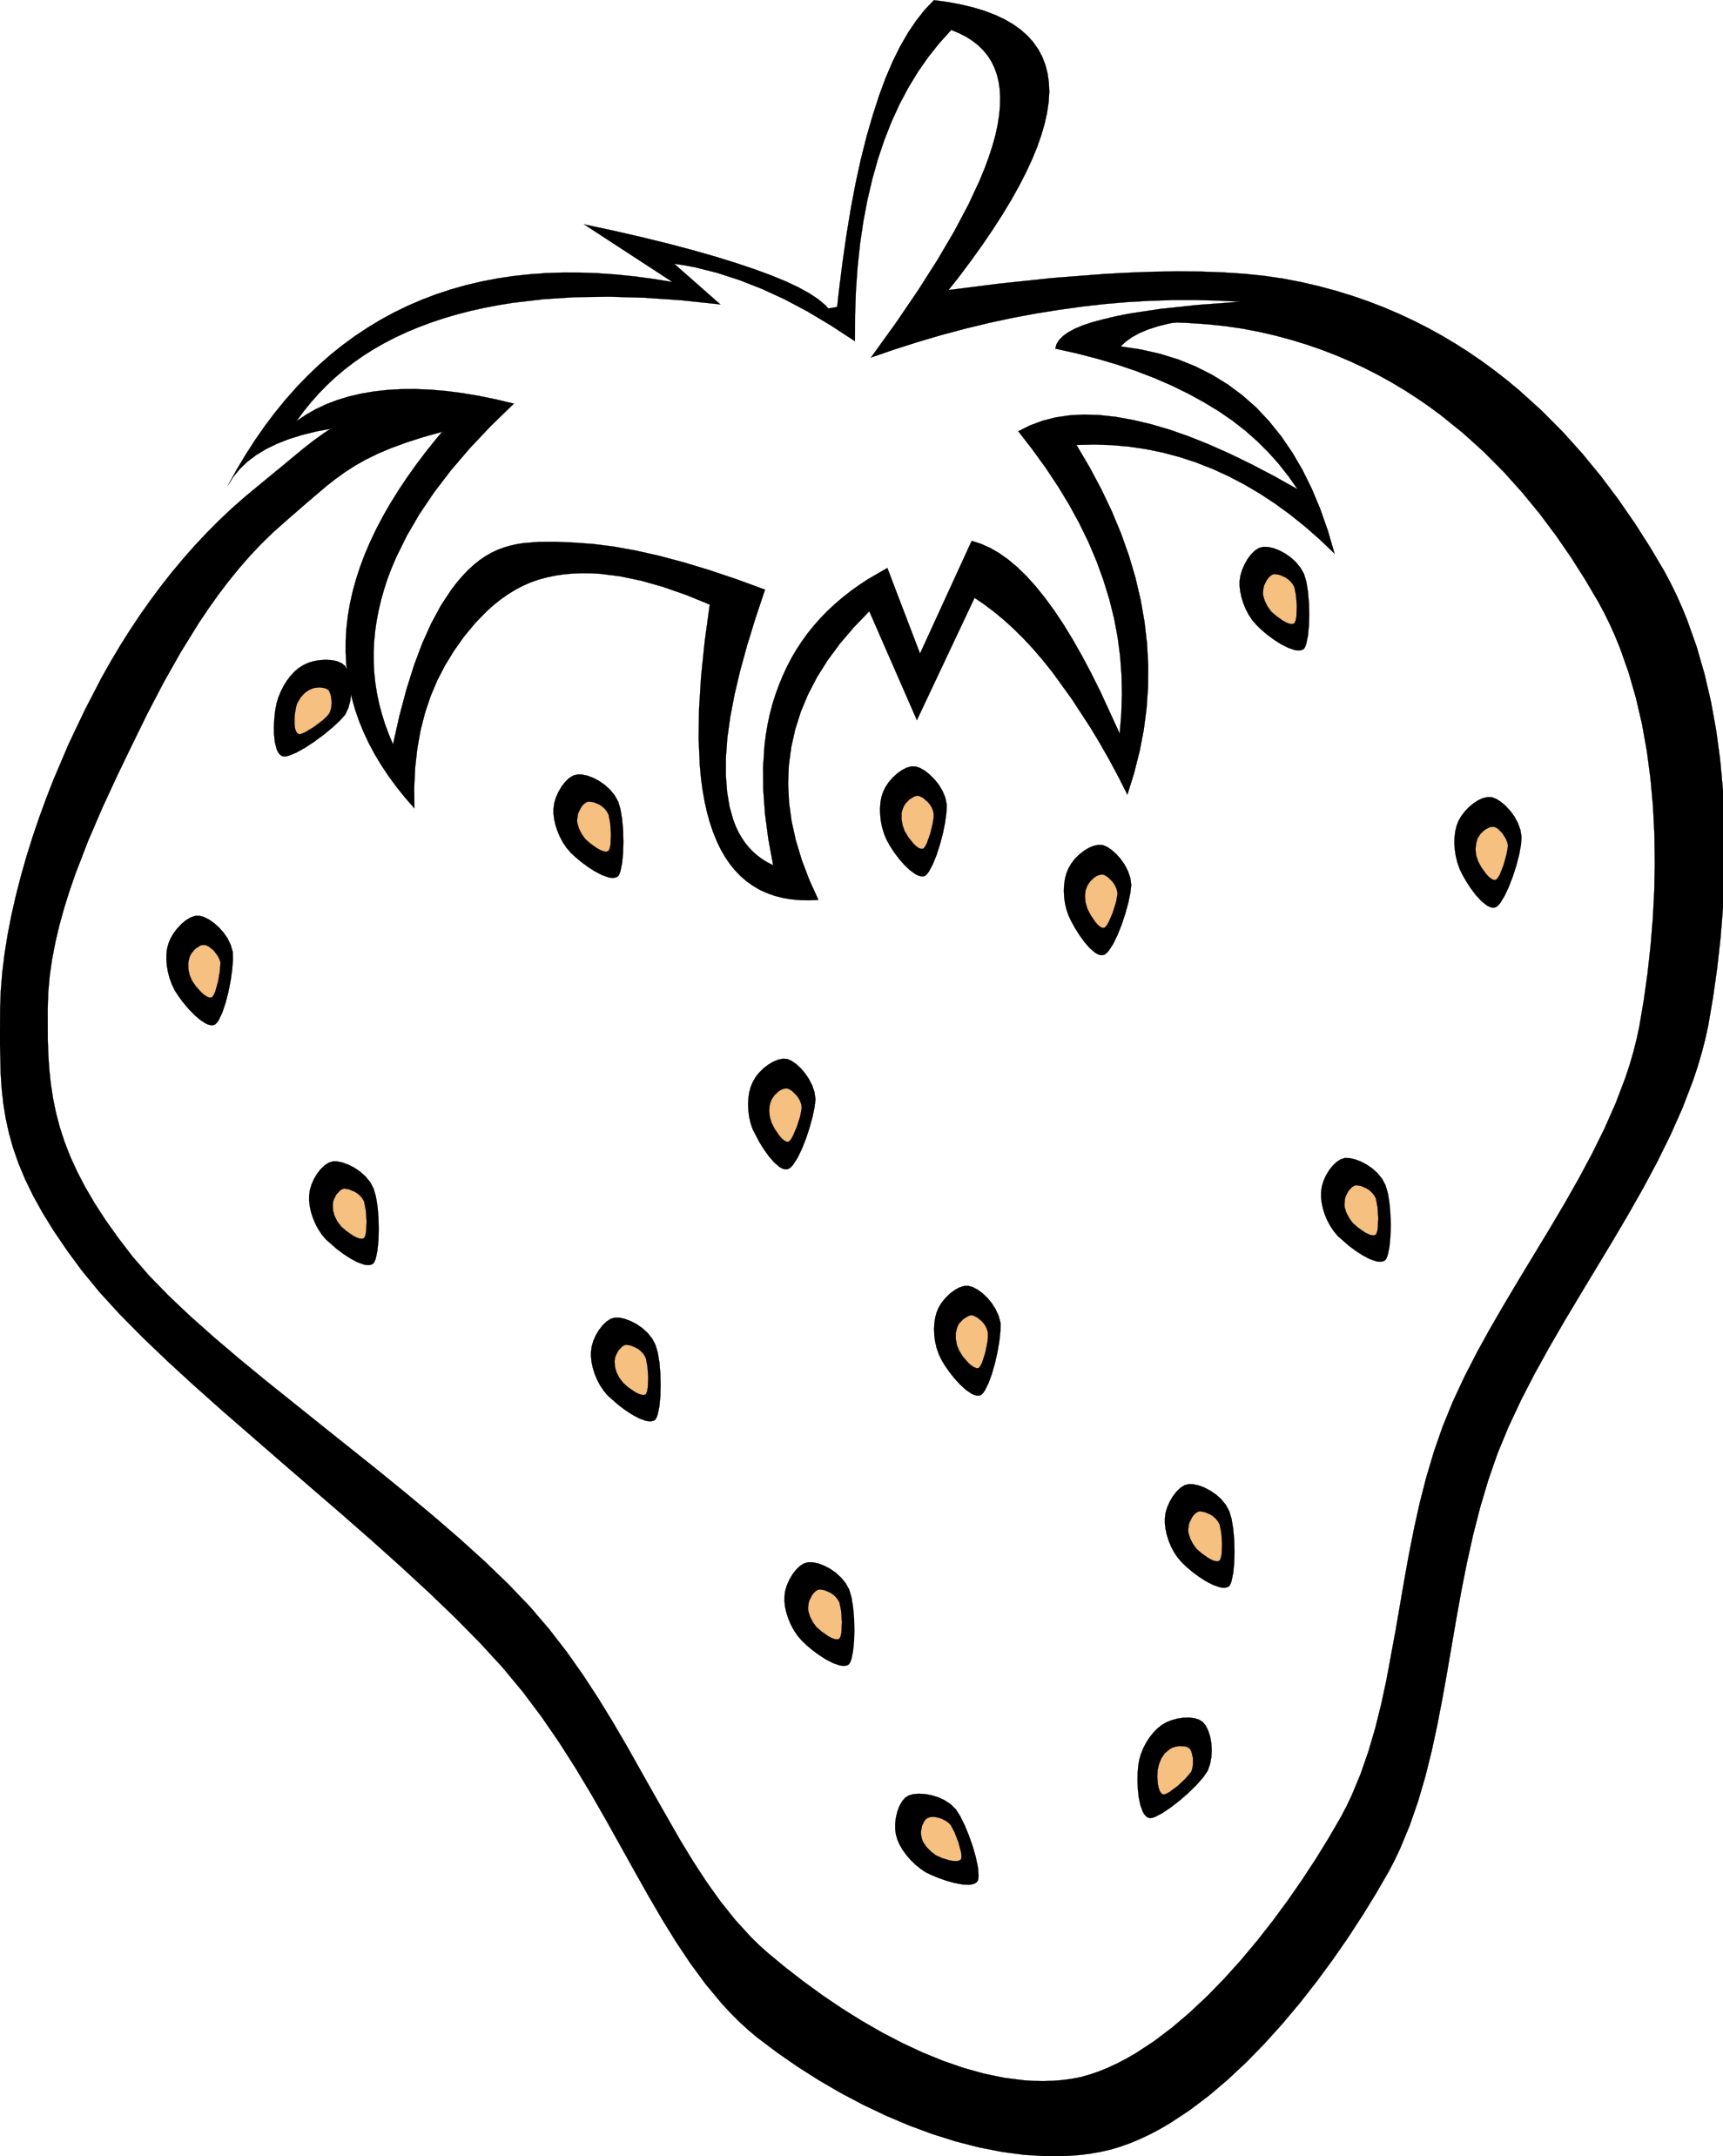 Black And White Fruit Clipart.